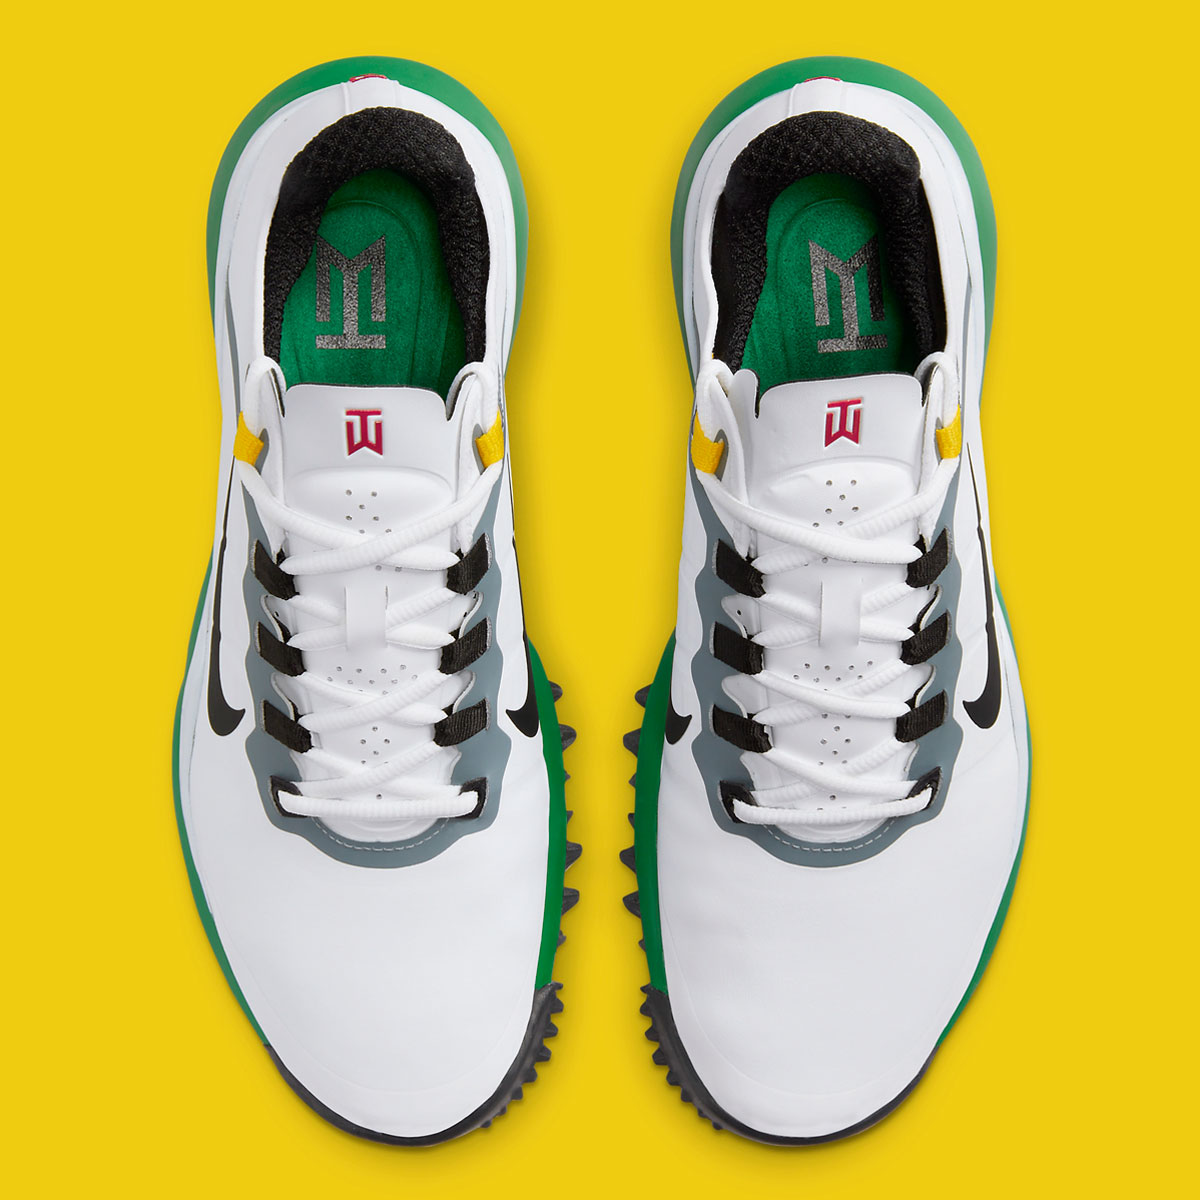 Nike Tw 13 Masters White Pine Green Cool Grey Dr5752 100 Store List 27